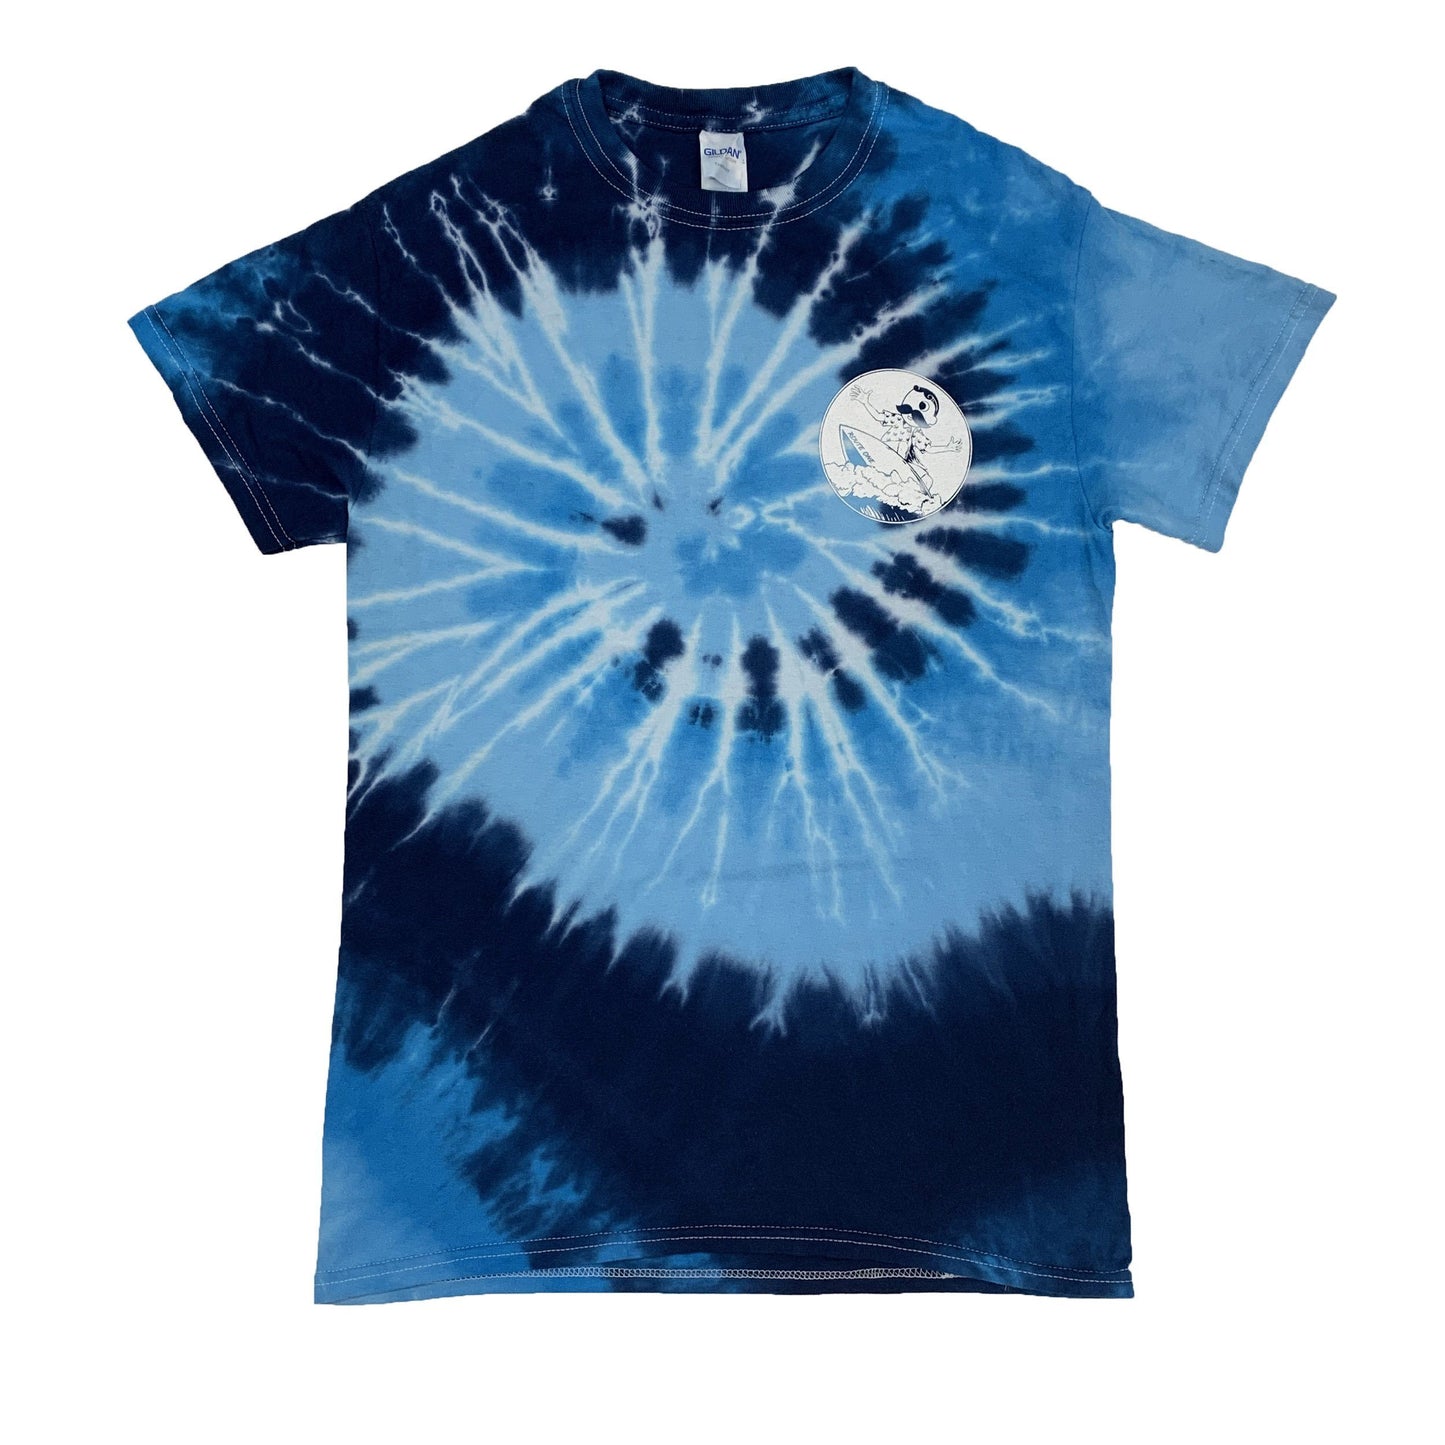 Boh Knows Surfing (Blue Tide Swirl) / Shirt - Route One Apparel